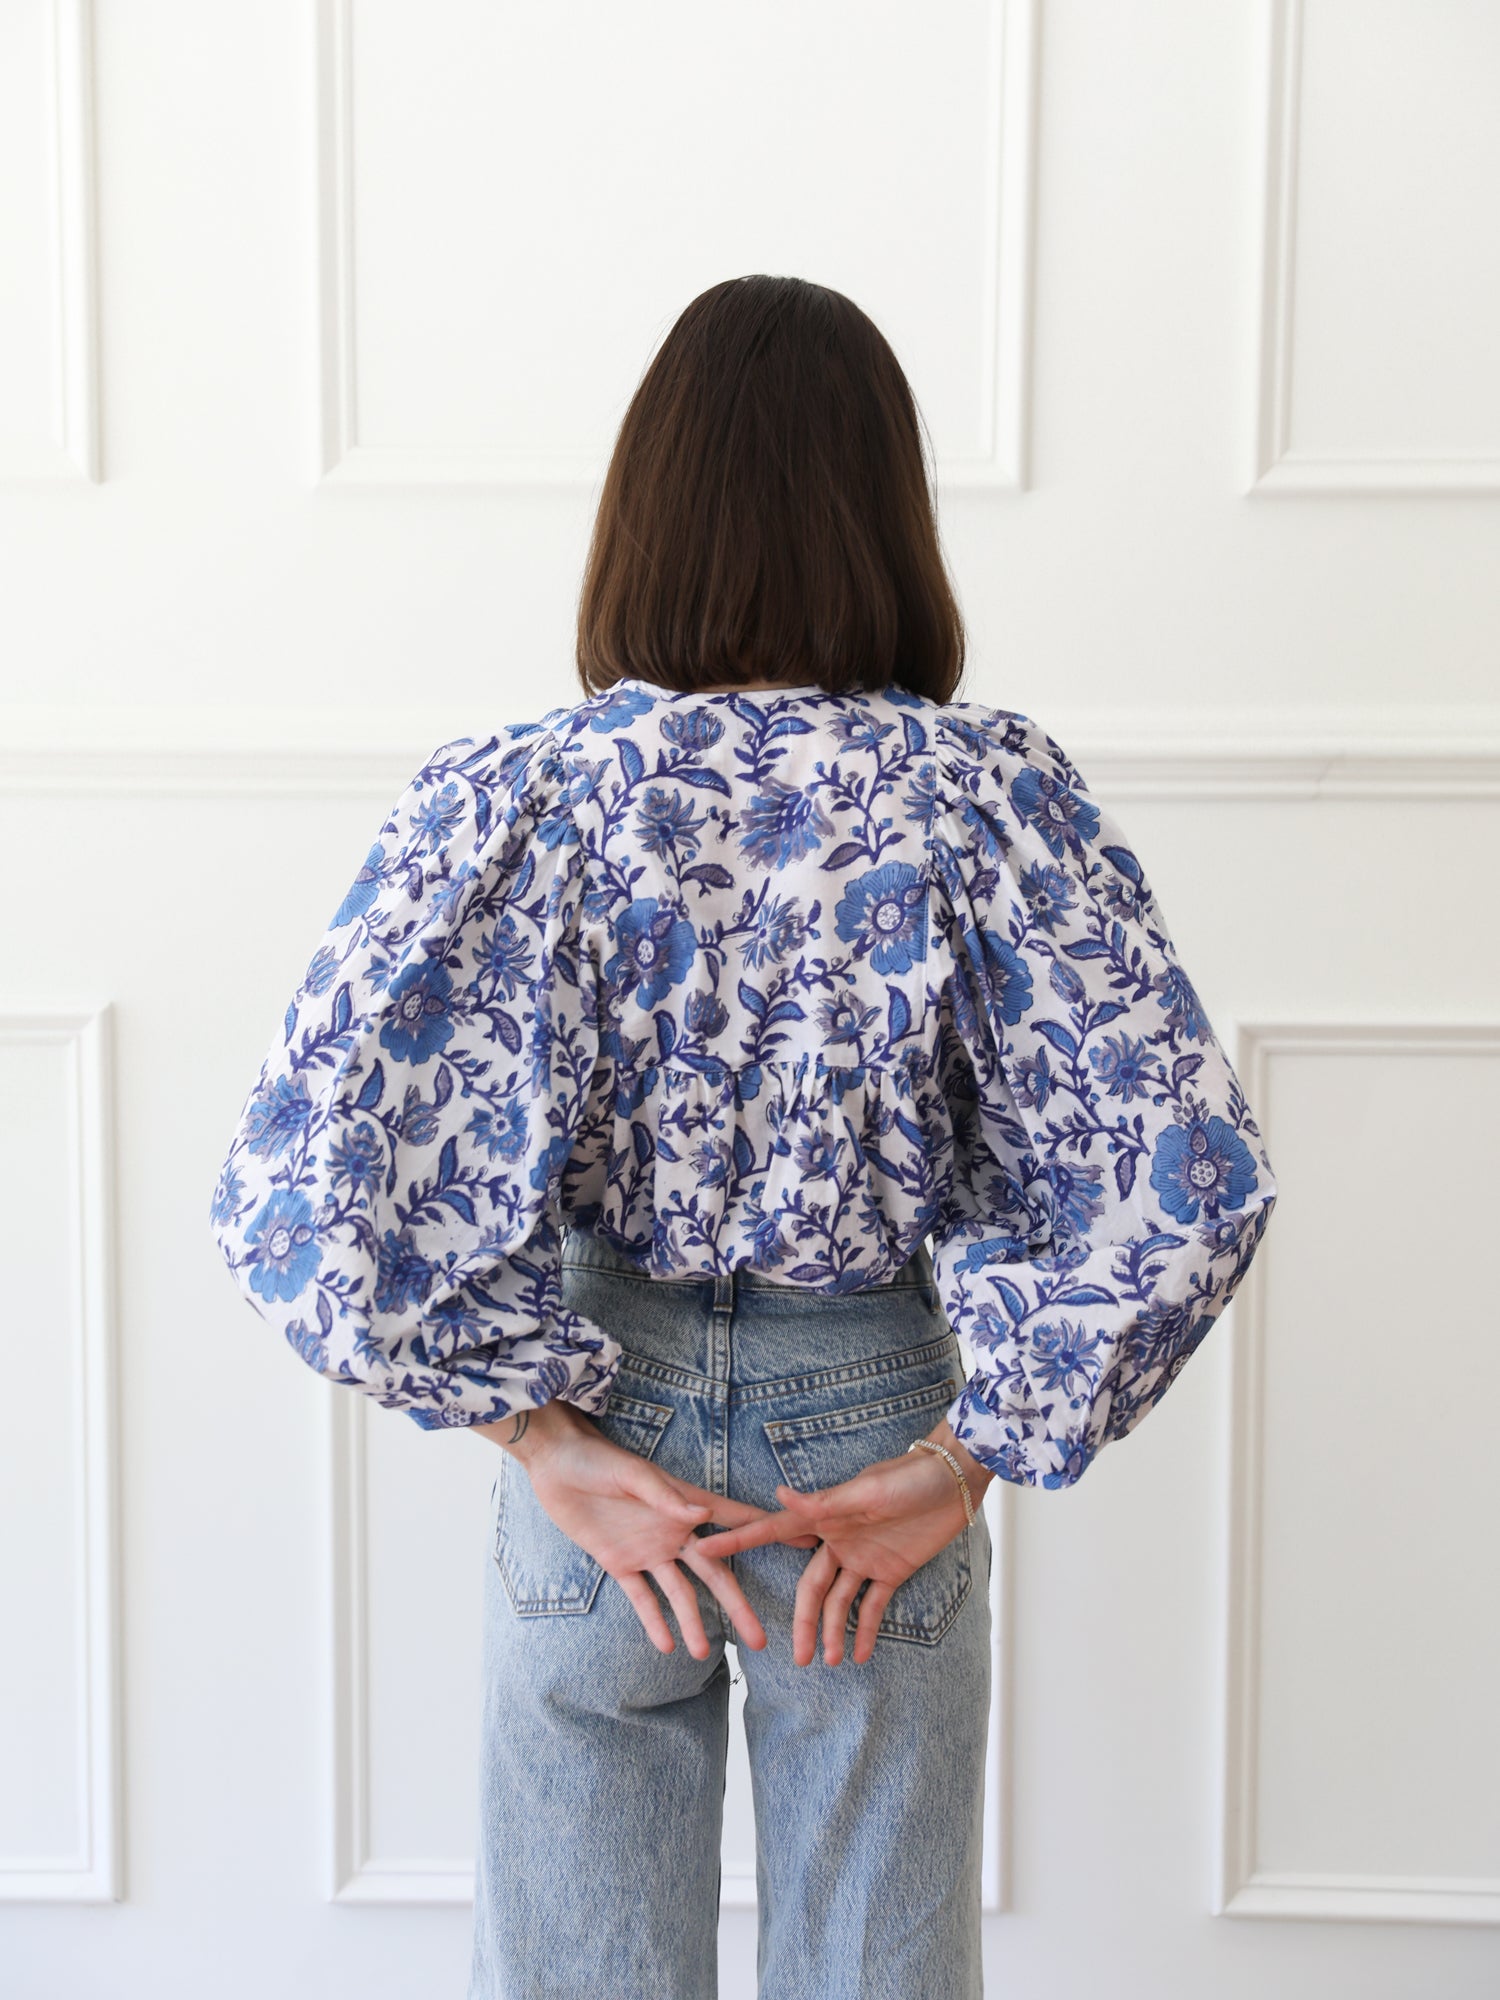 MILLE Clothing Charlie Top in Blue Floral